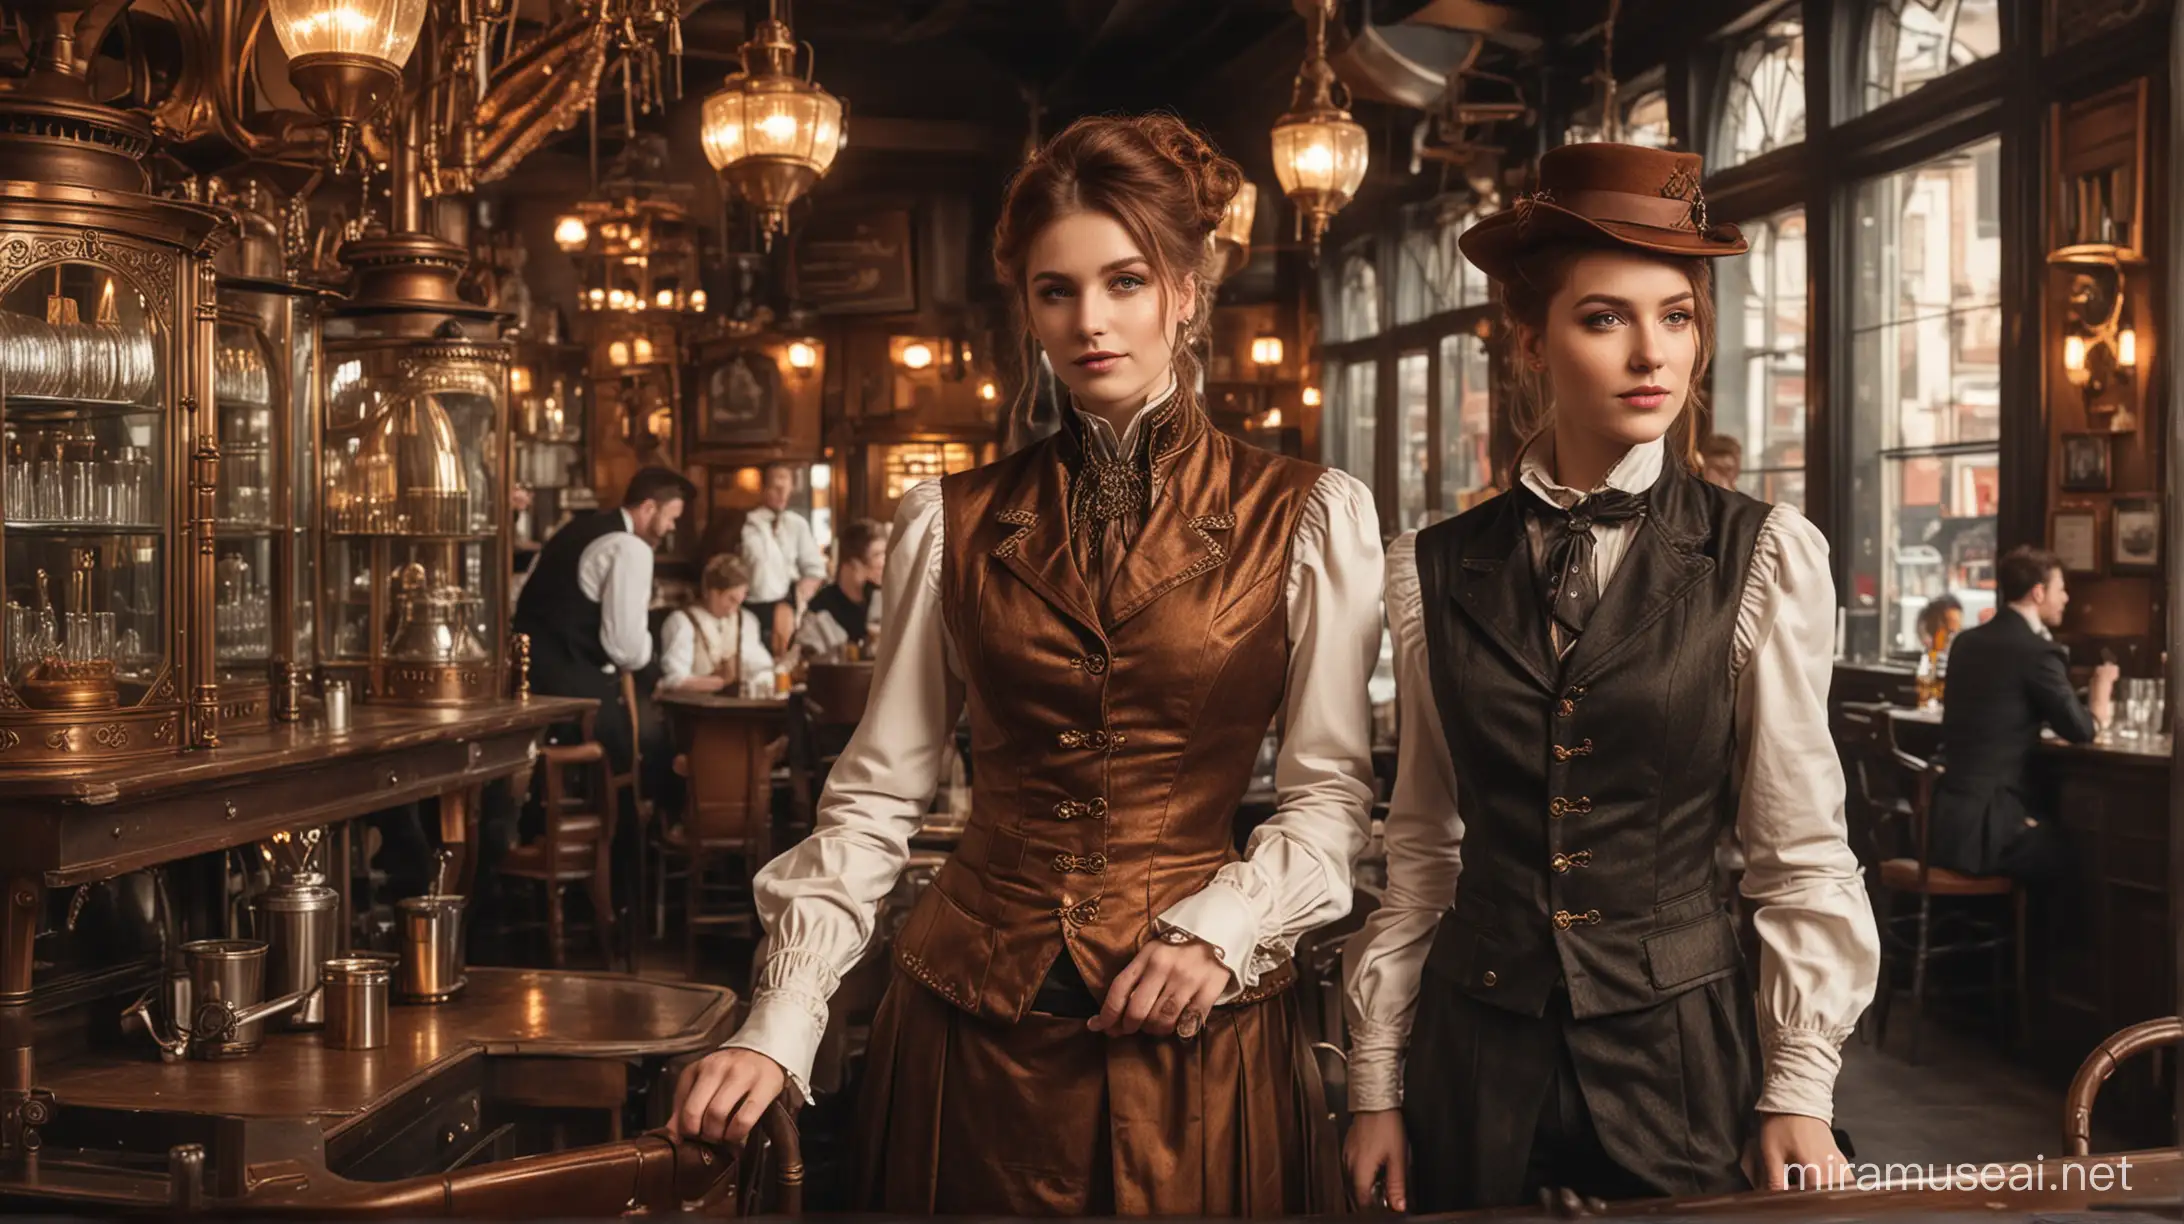 Elegant Steampunk Restaurant with VictorianStyled Guests and Copper Accents